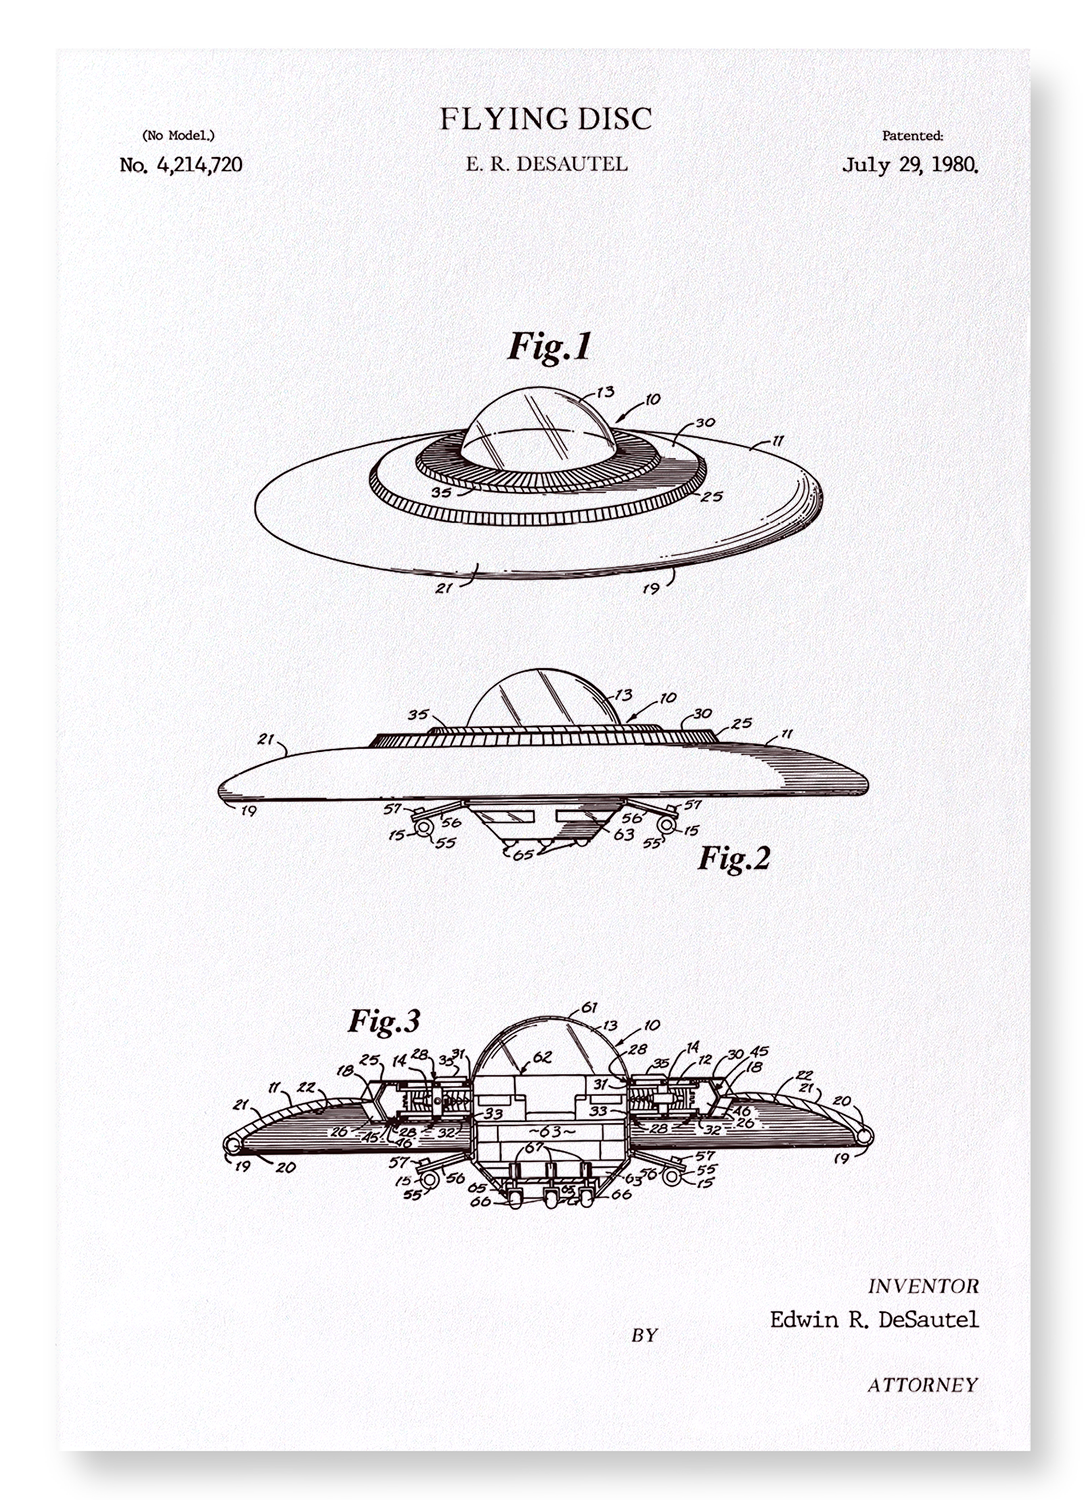 PATENT OF FLYING DISC (1980)